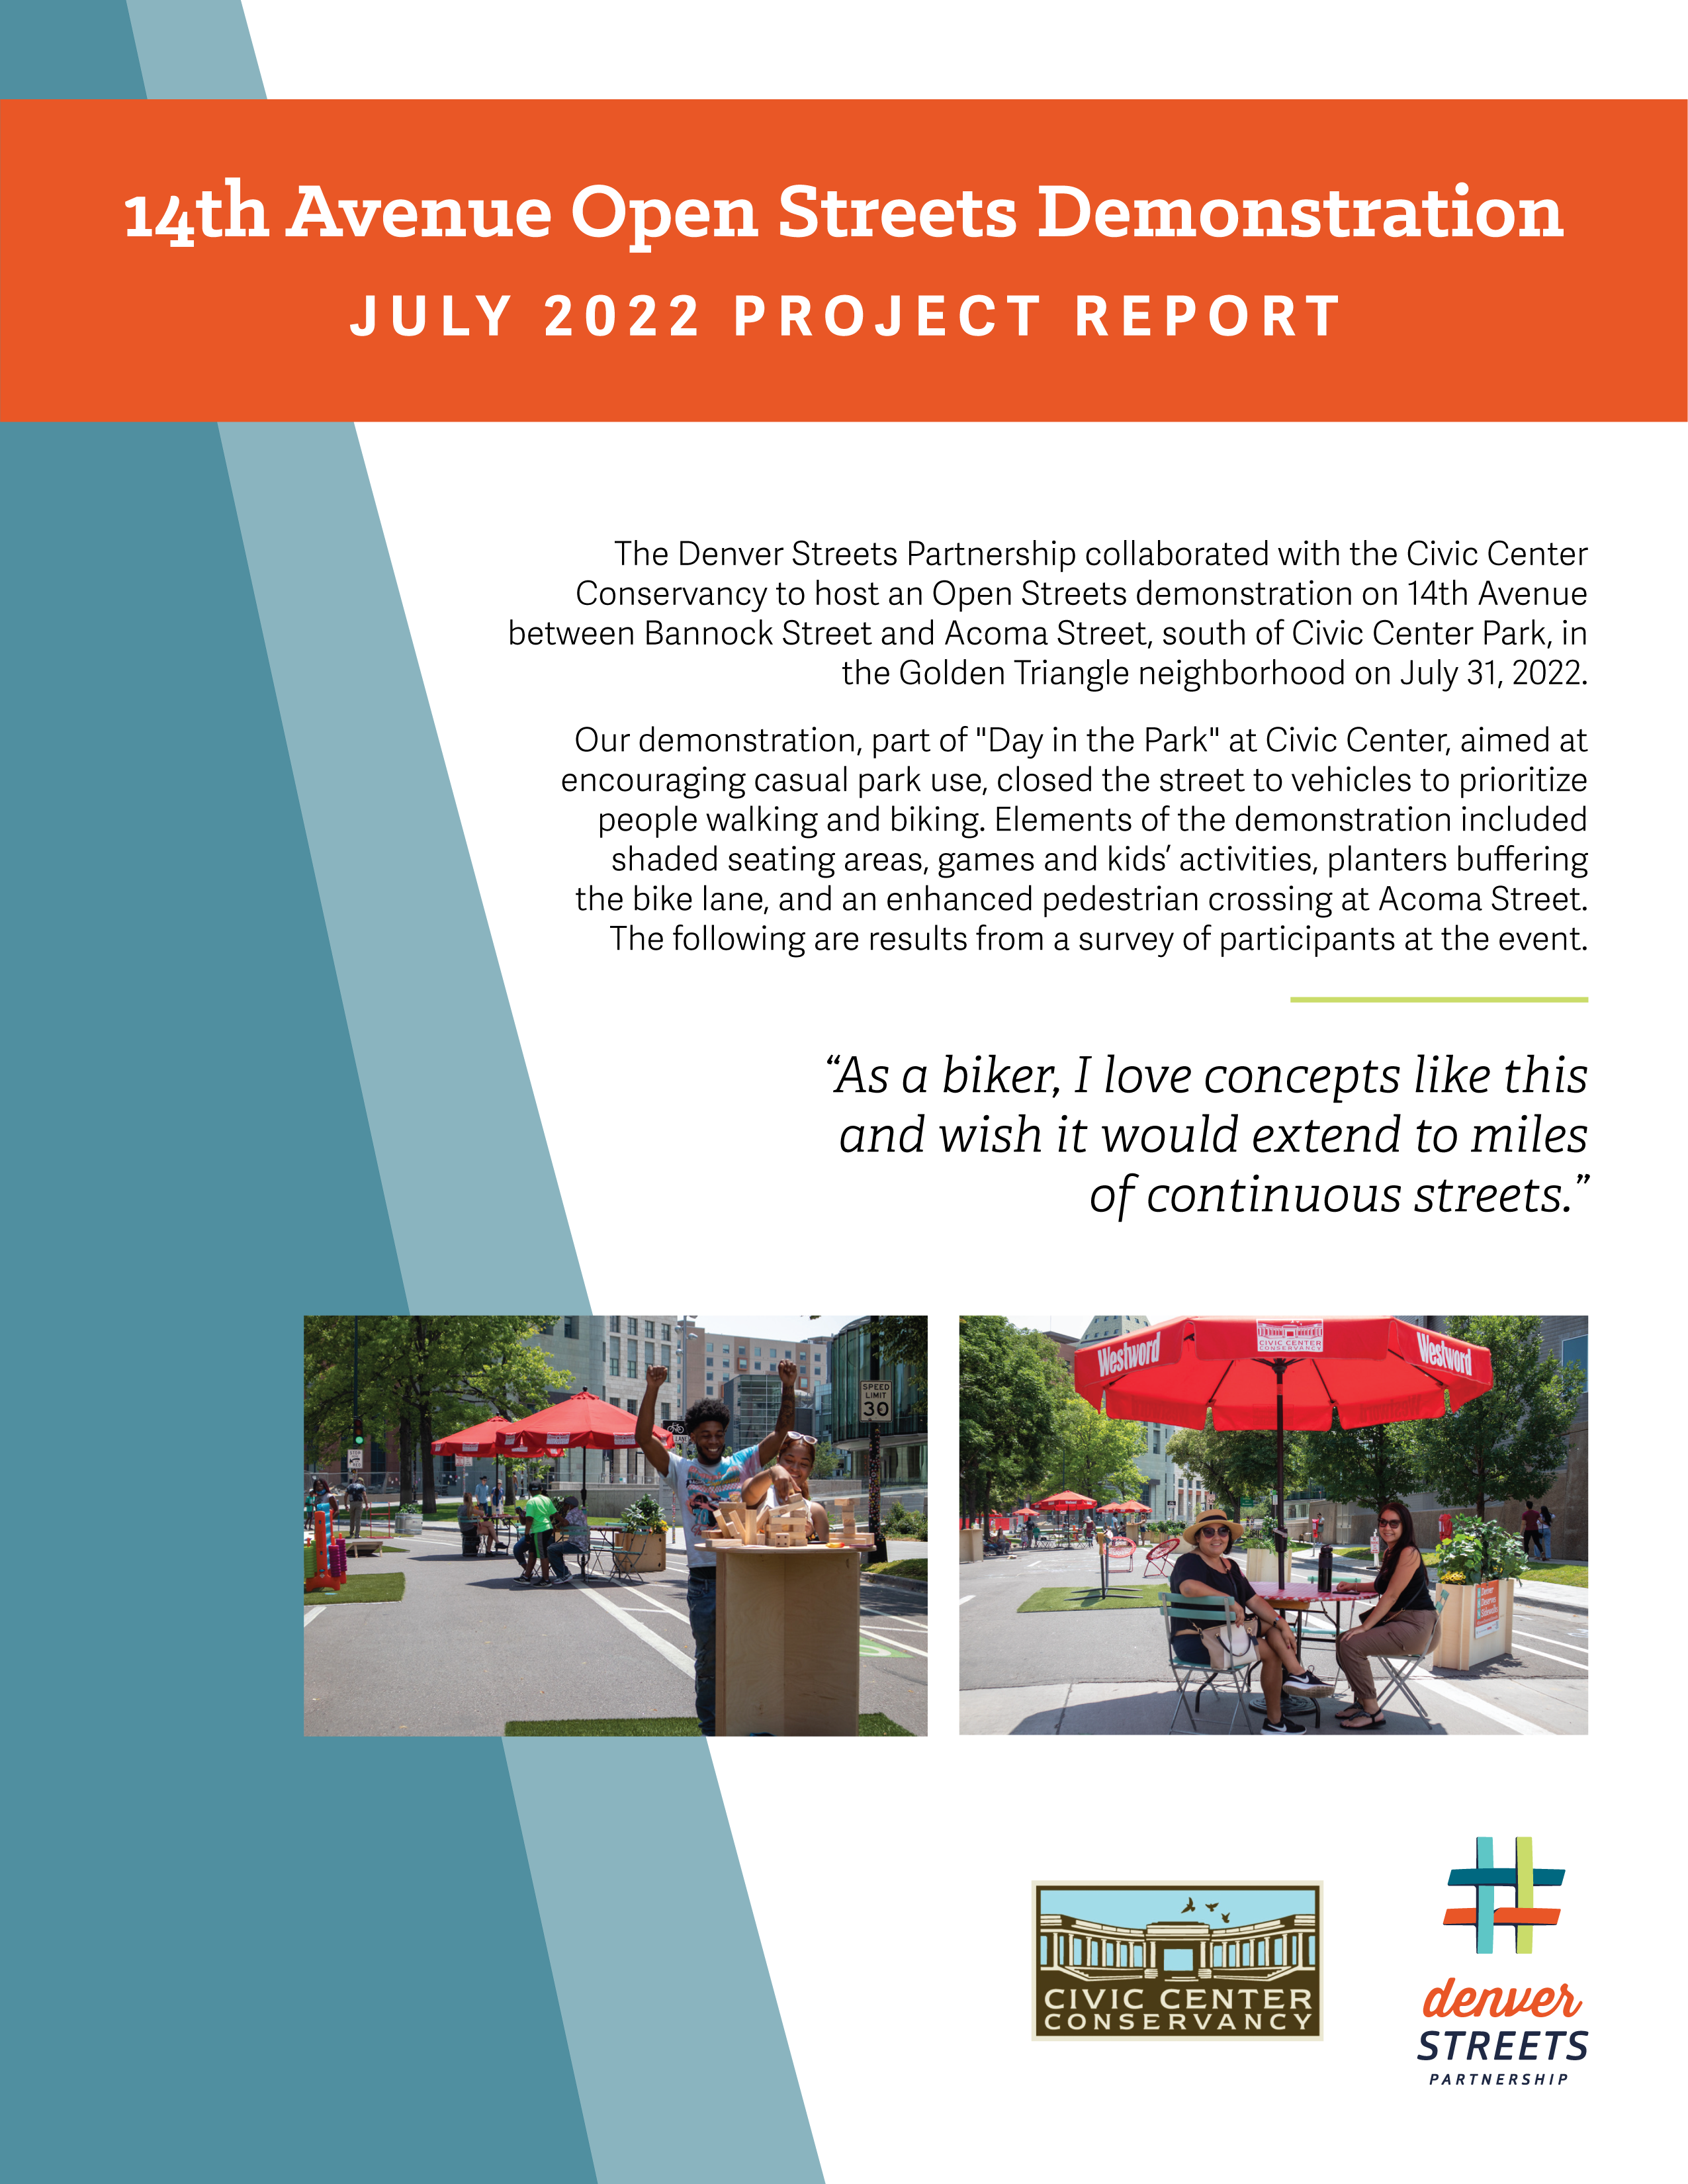 An image of the first page of the project report linked on this webpage.